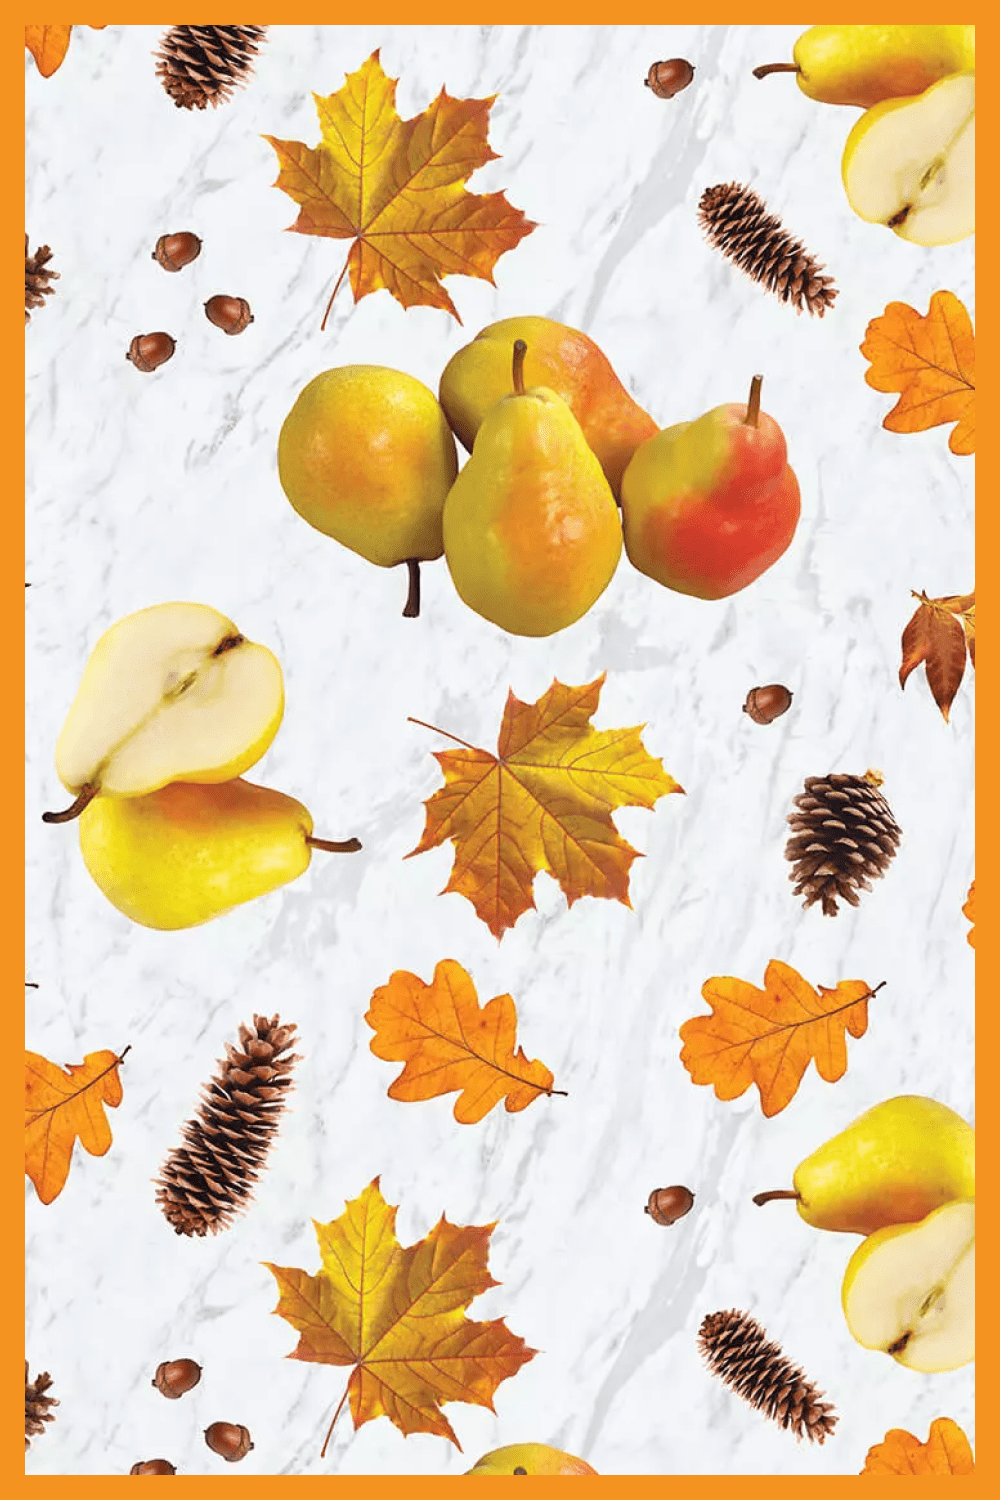 Ripe pears, yellow leaves and cones on a white background.